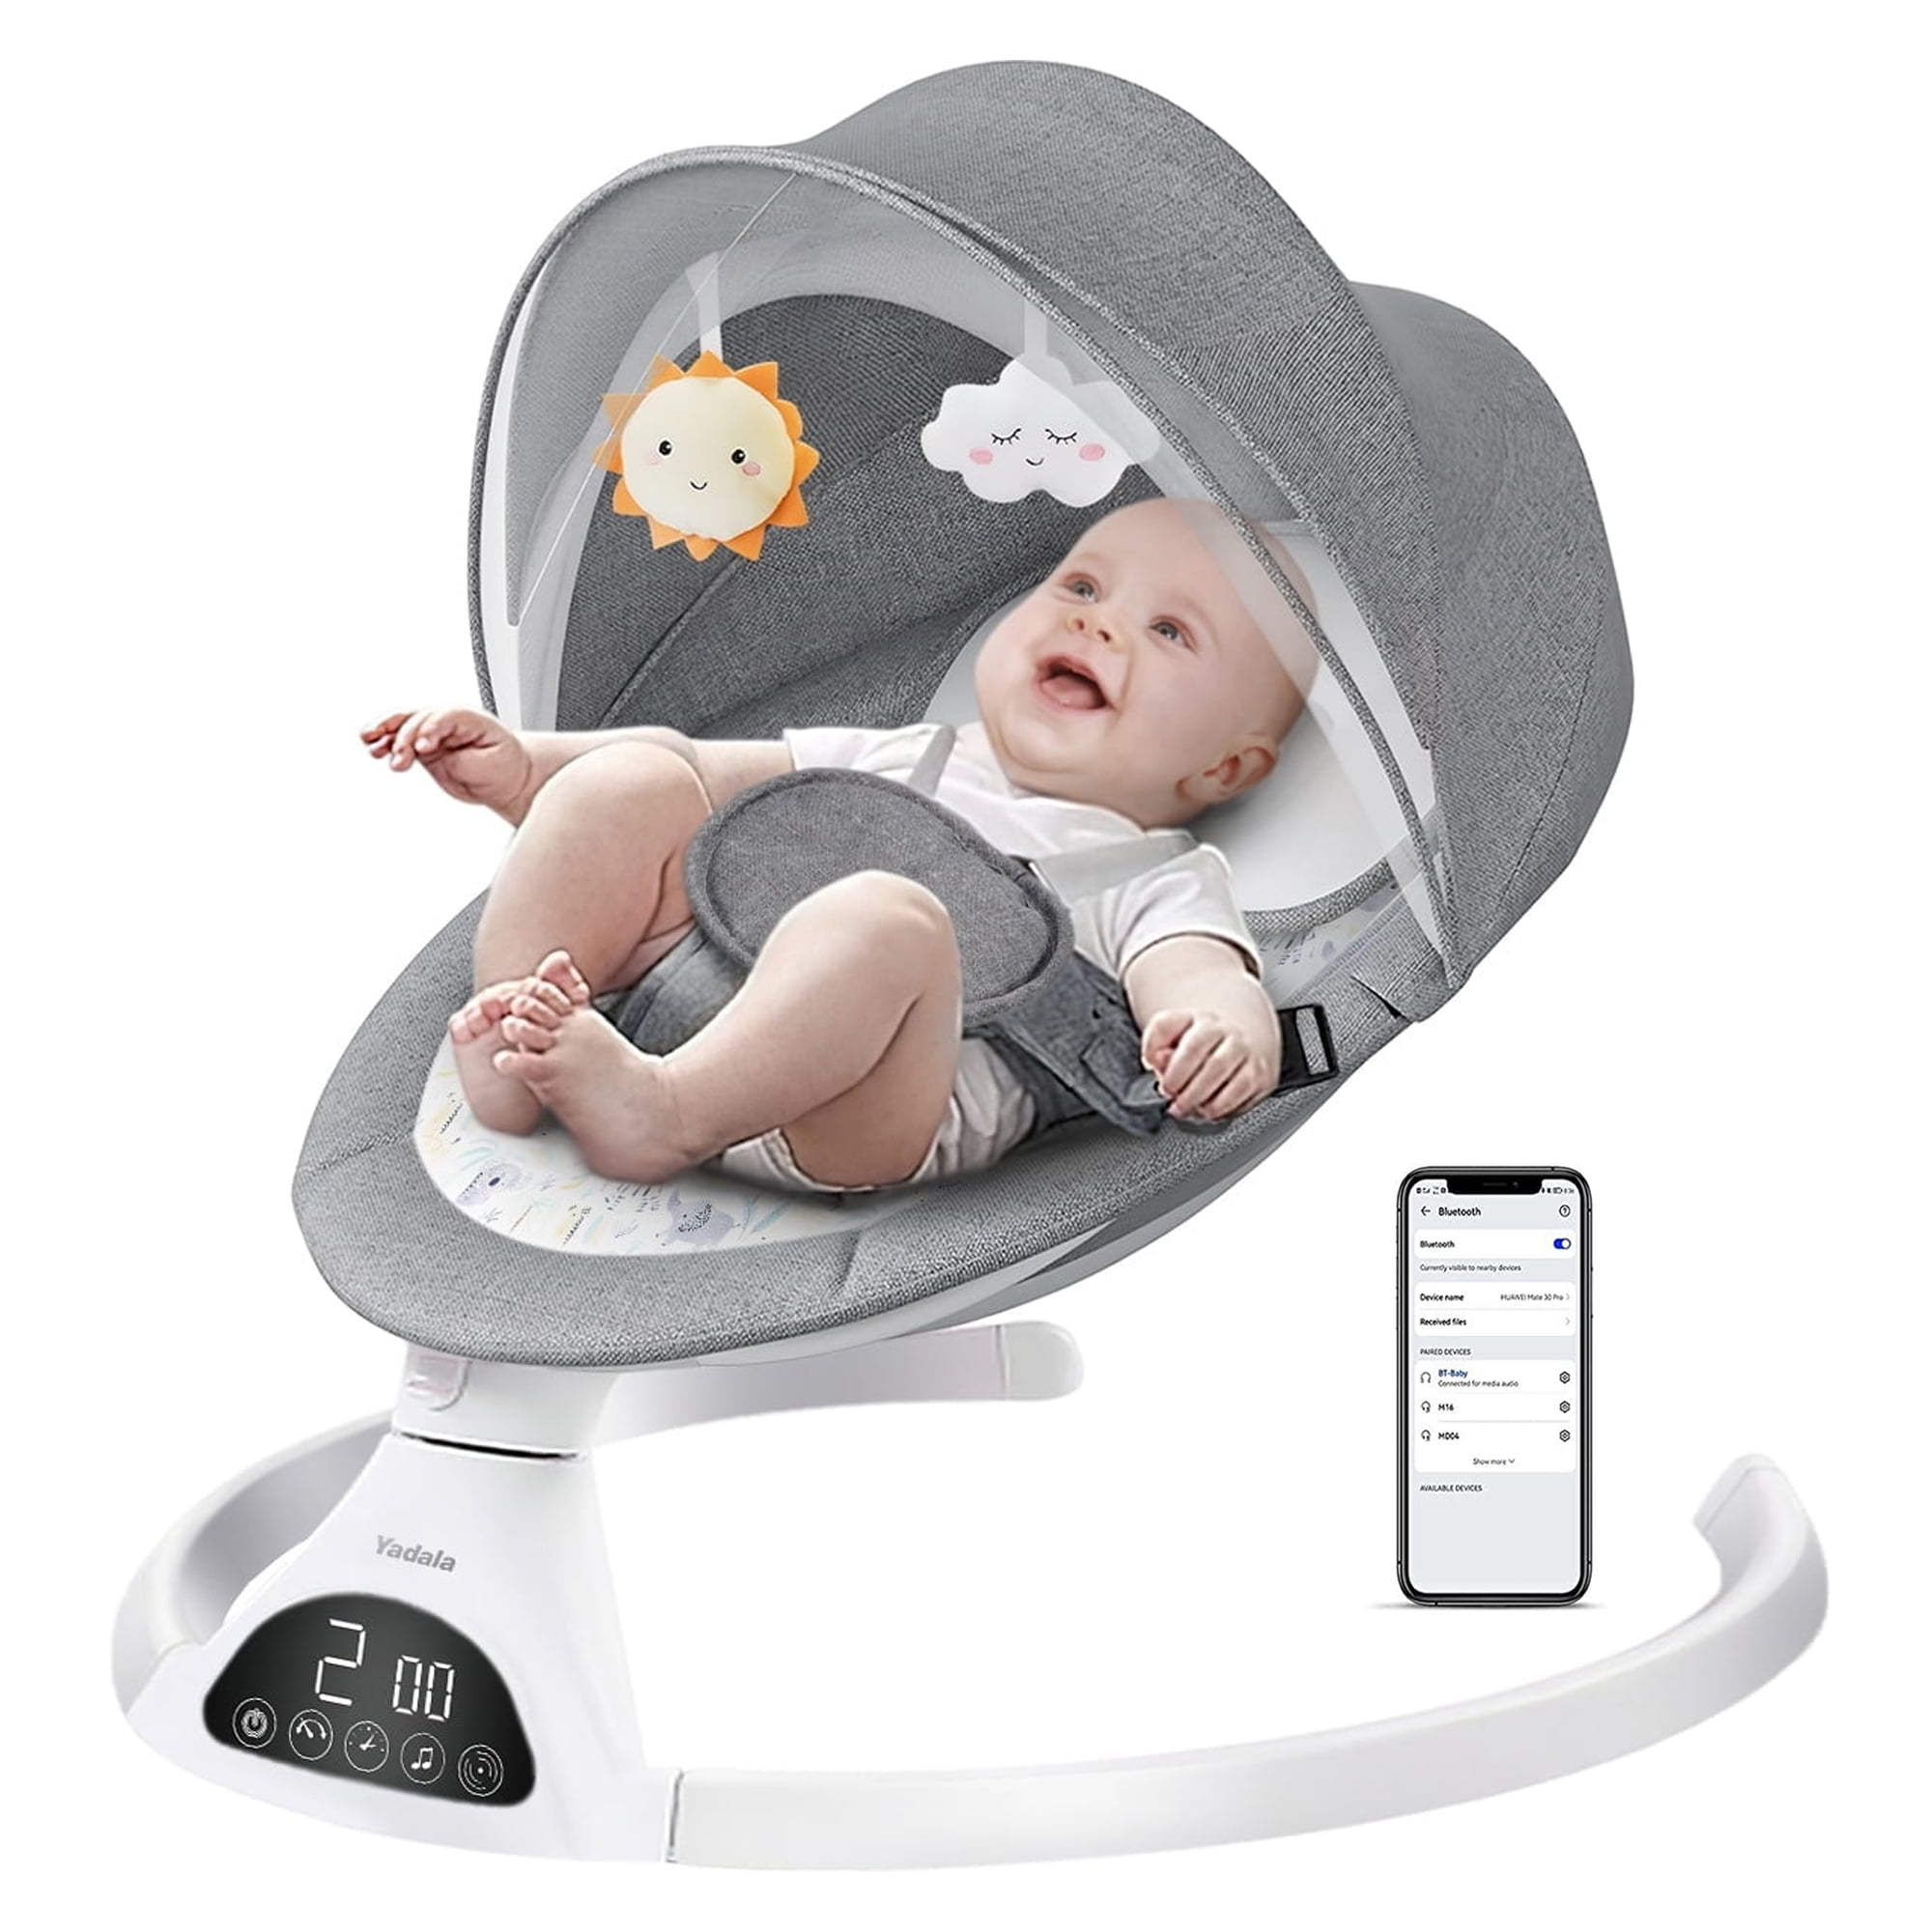 Baby bouncers and swing chairs - Baby bouncers and swing chairs